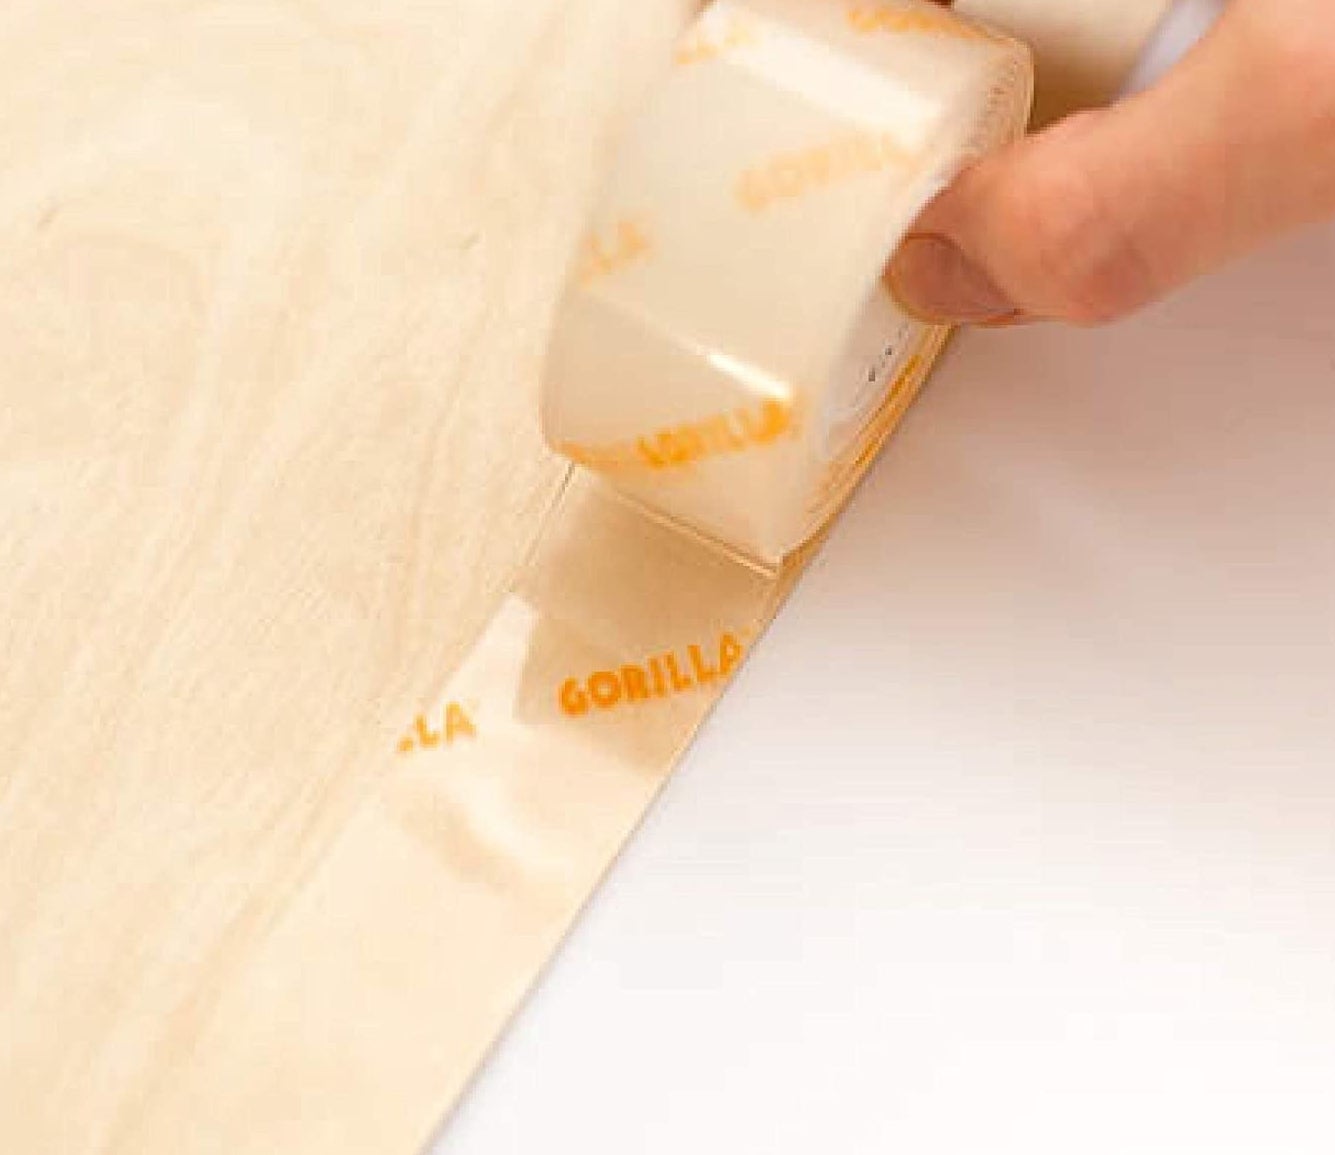 a person rolling the extra-strong mounting tape across the edge of a wooden surface